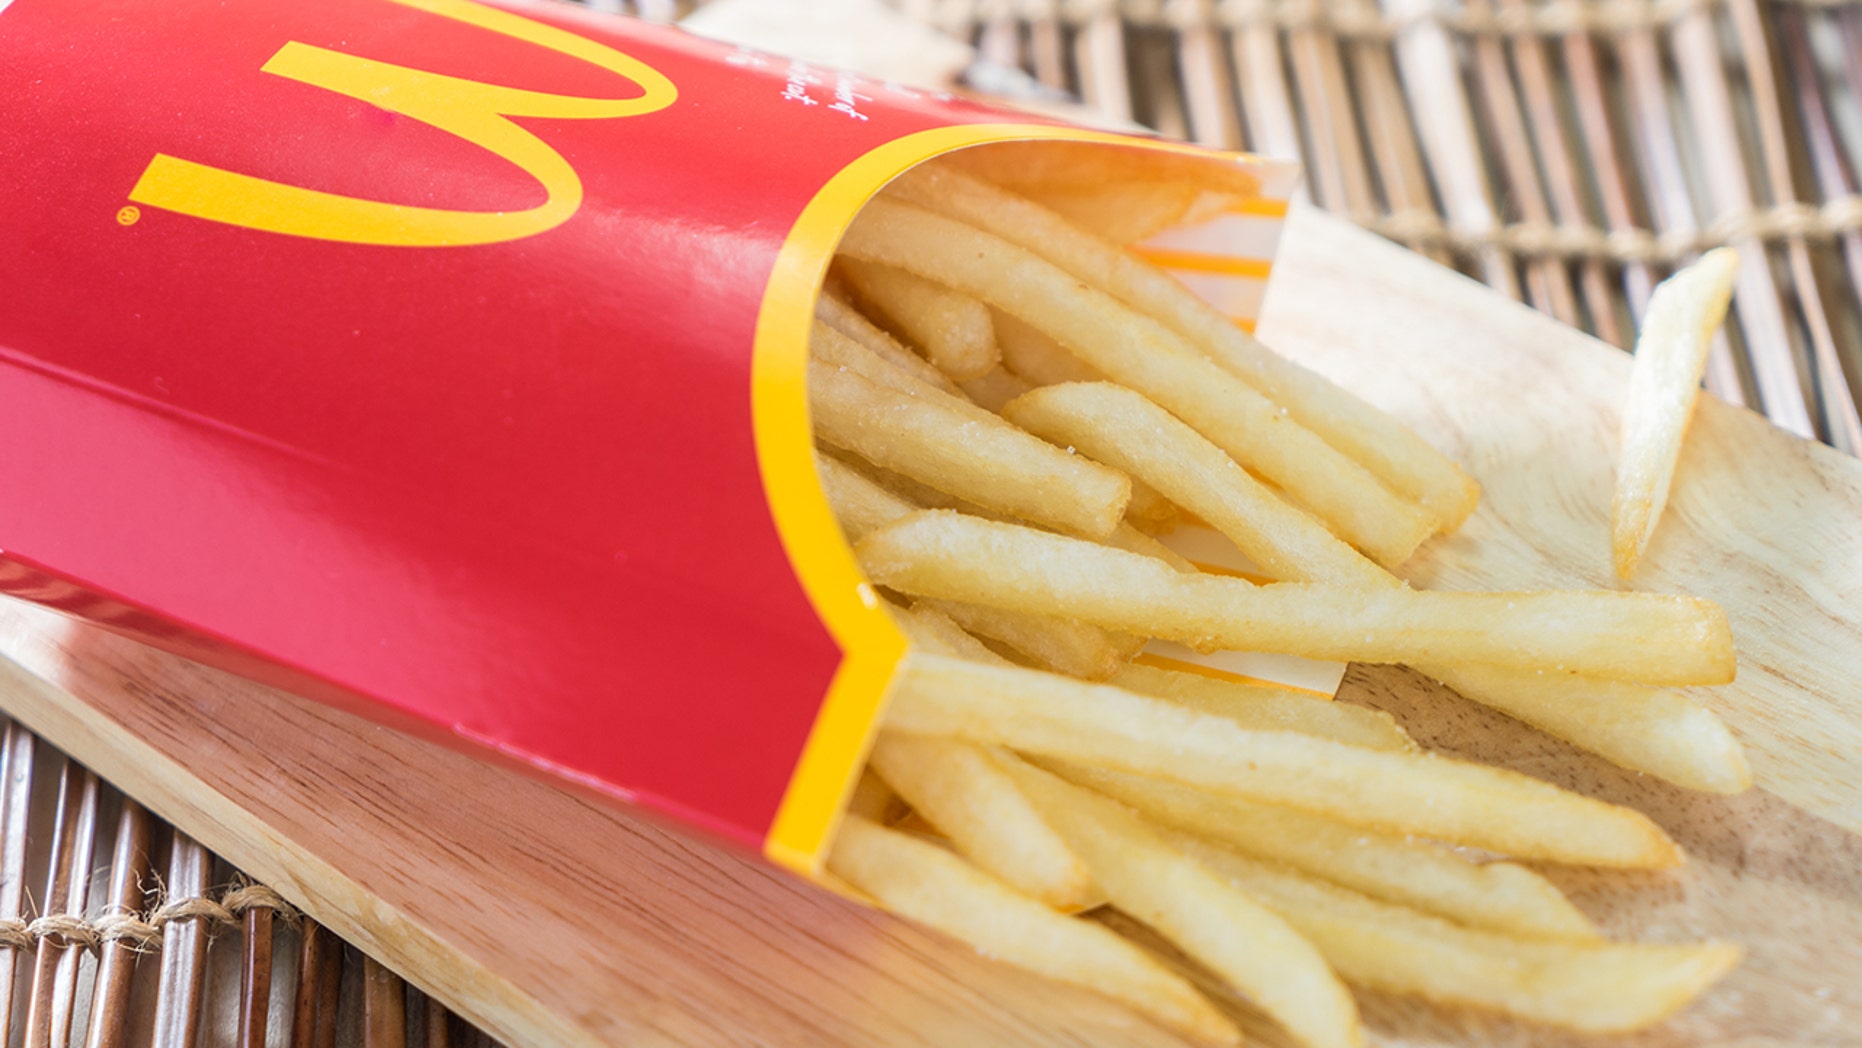 McDonald’s fan discovers french fry box ‘purpose,’ sparks Twitter debate